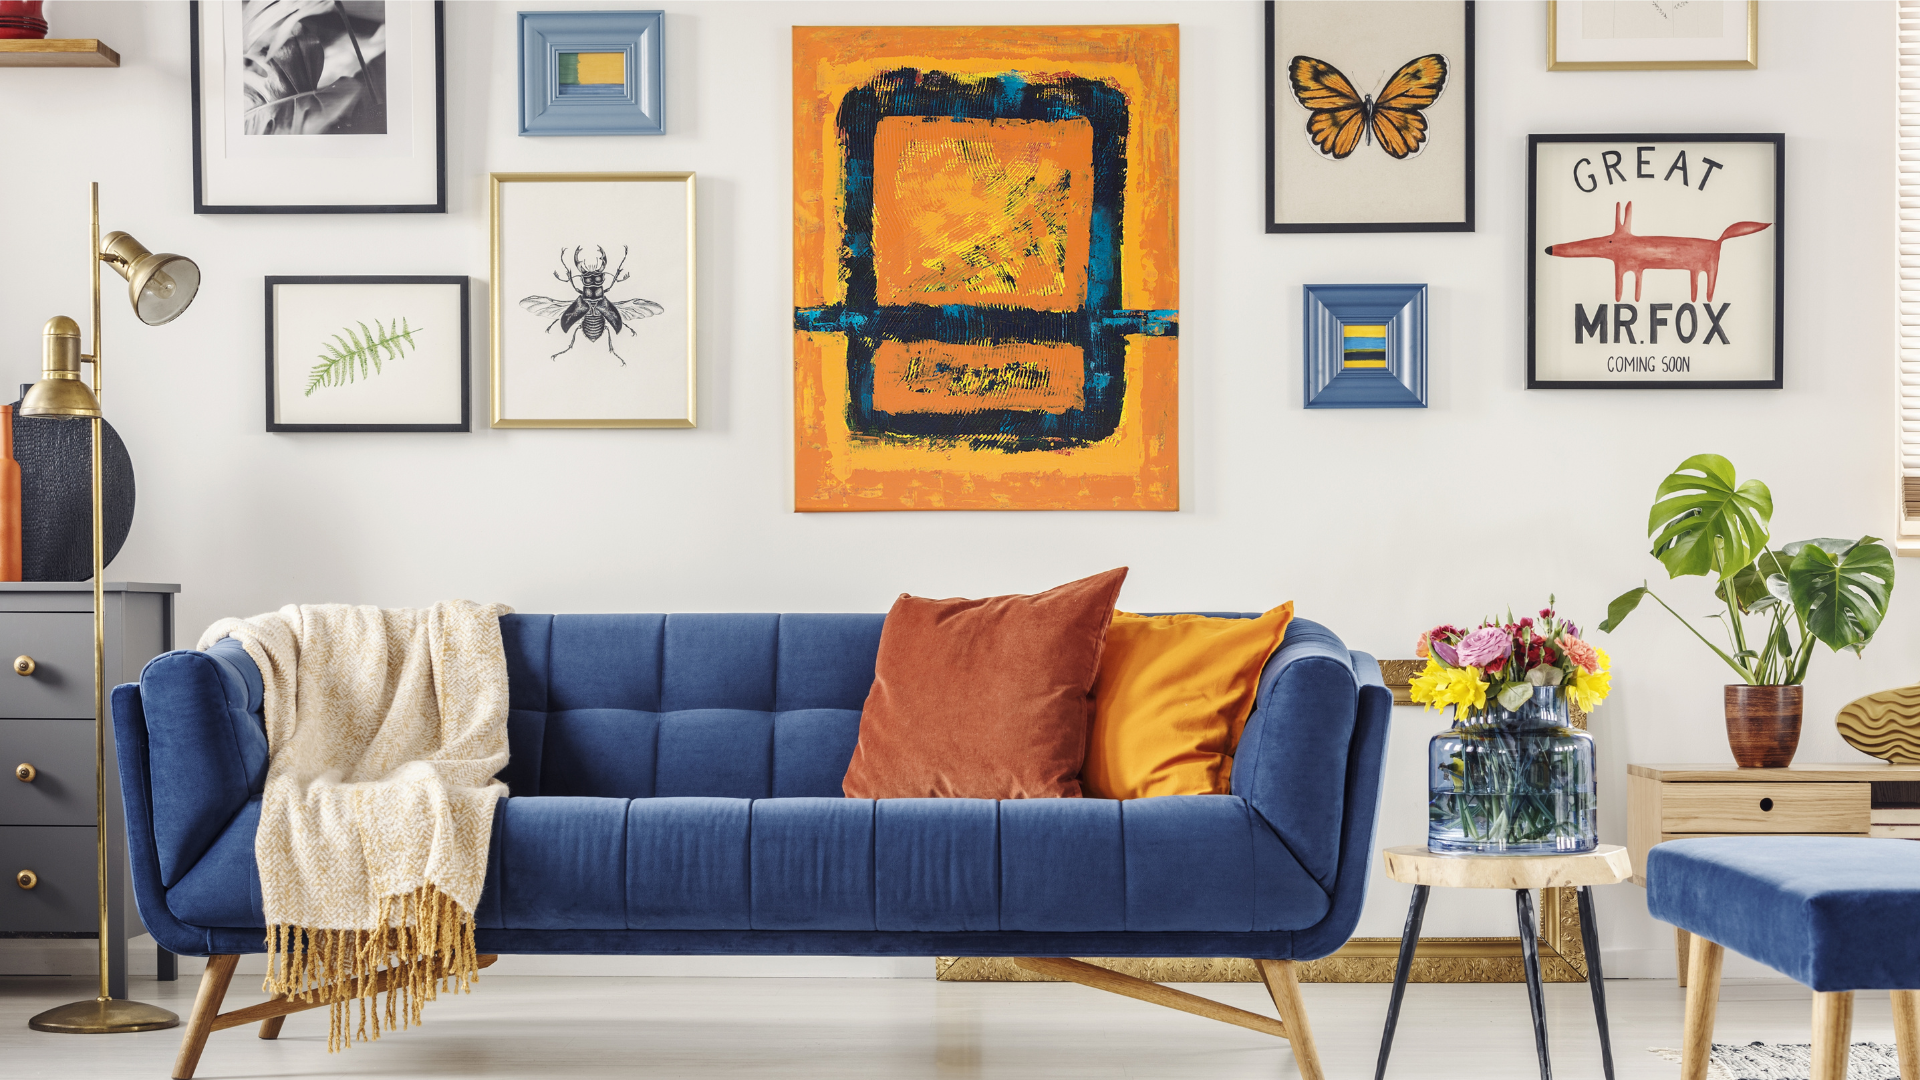 Modern, artsy living room with blue sofa and complementary orange throw pillows